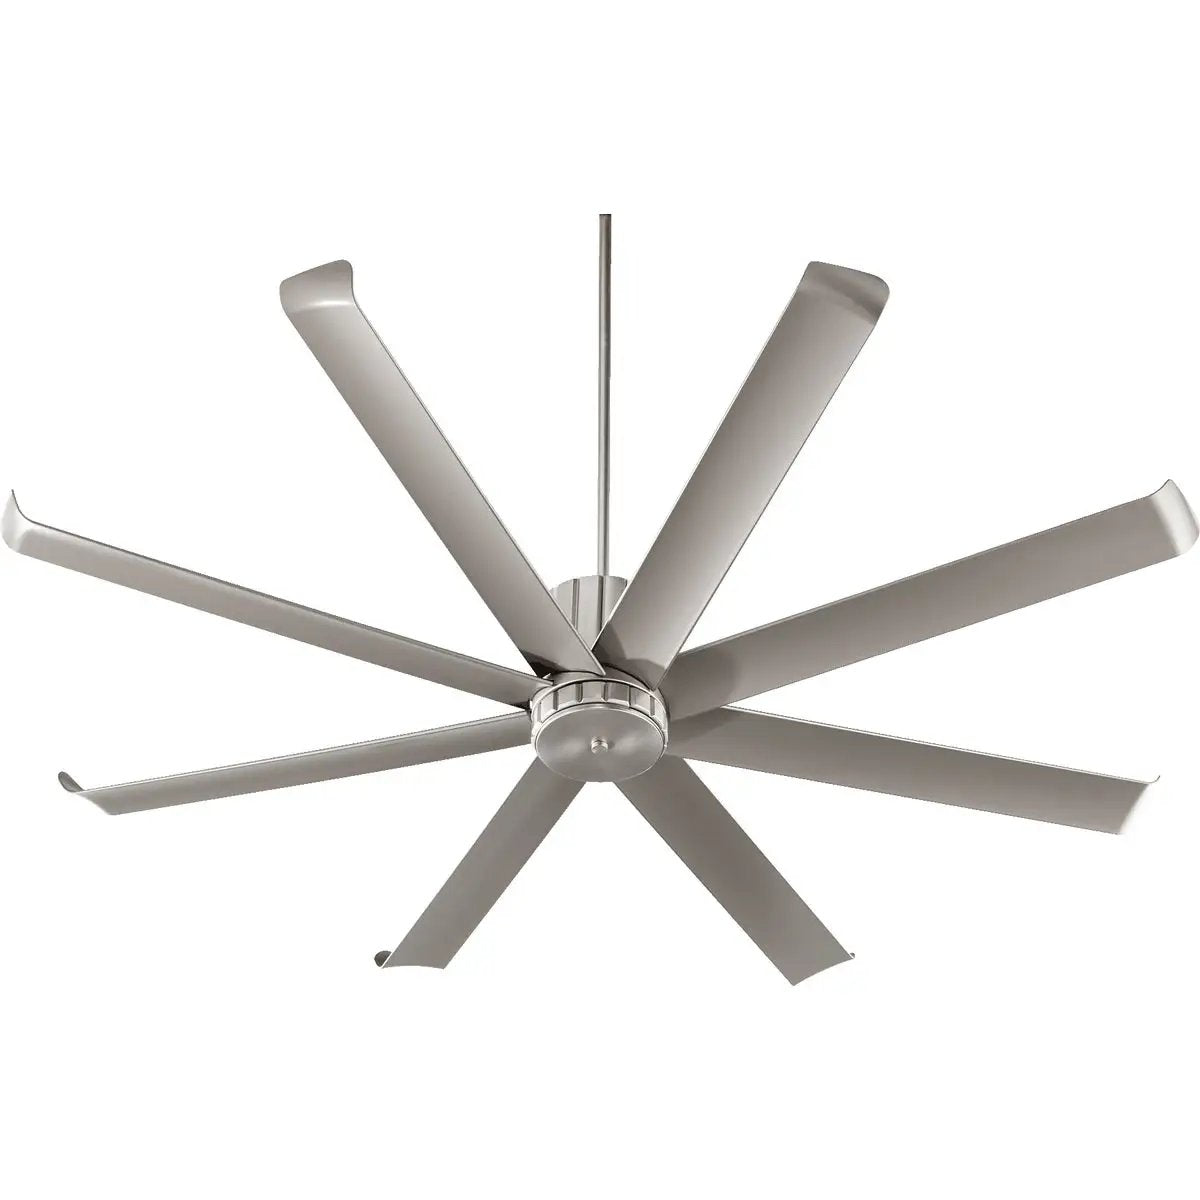 A sleek 72 inch ceiling fan with upturned blades for maximum air circulation. The cylindrical housing adds contemporary artistry to its beauty.